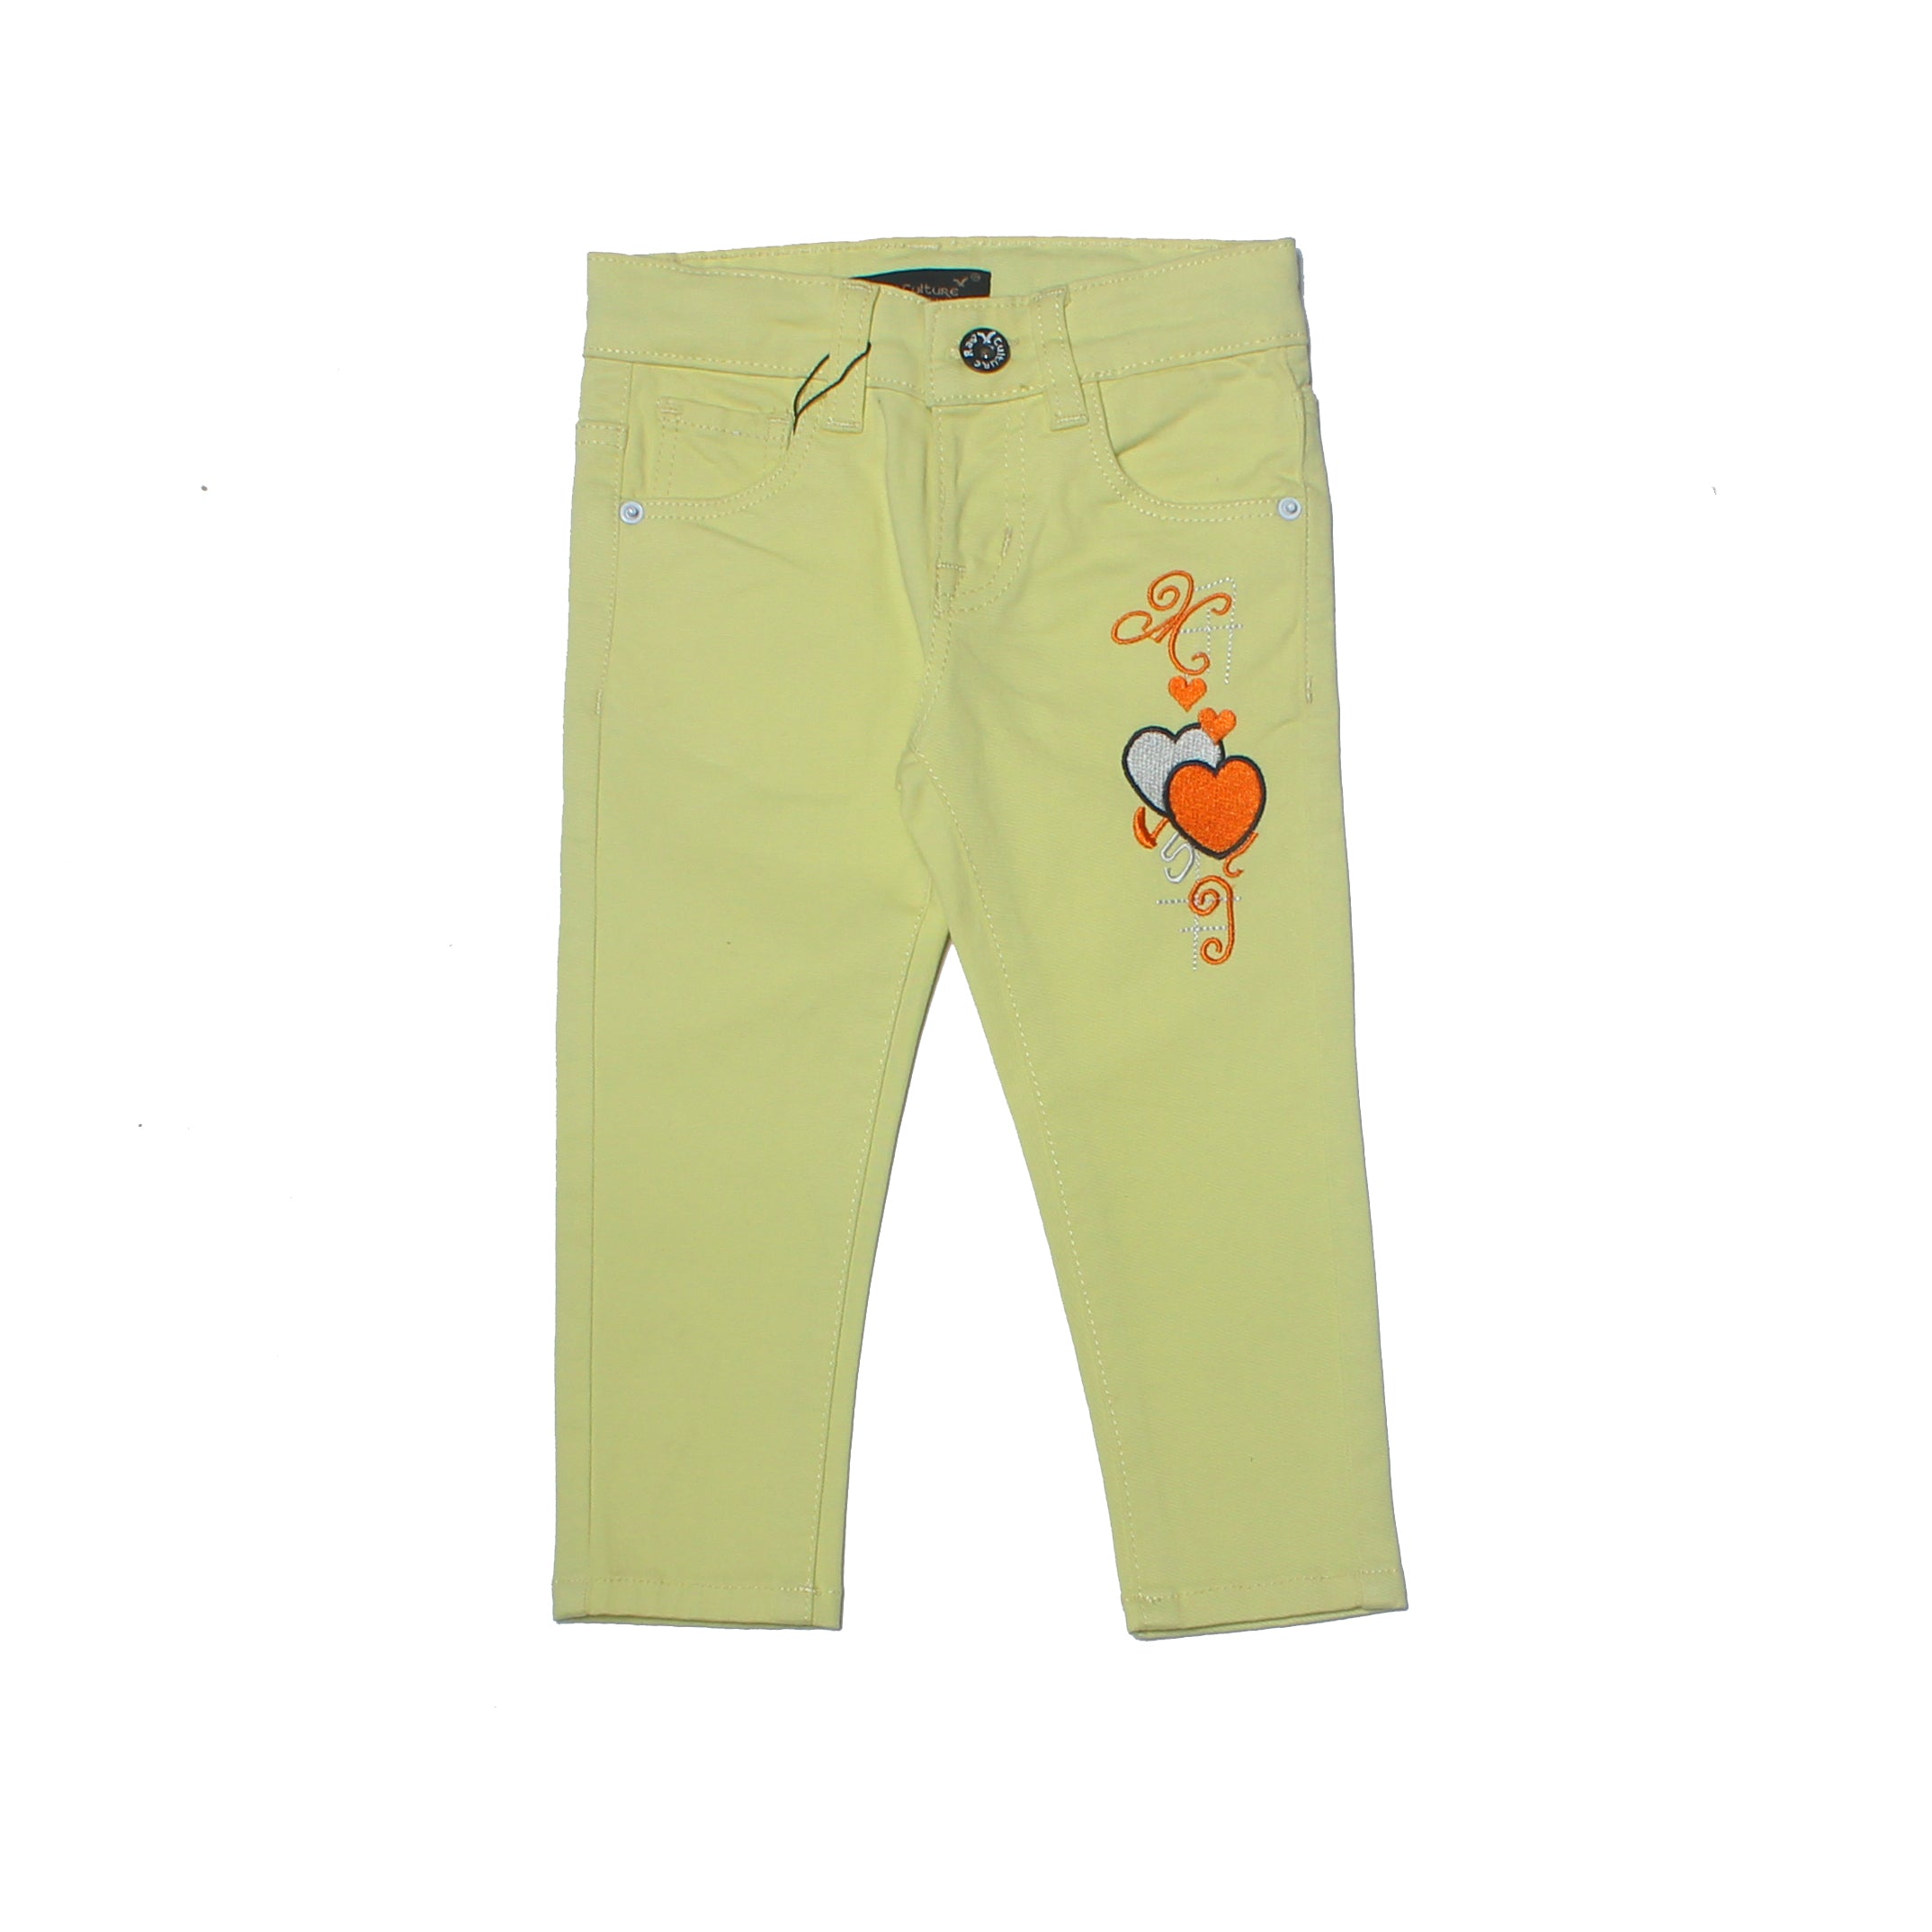 NEW LIME HEART EMBROIDED PANTS FOR GIRLS